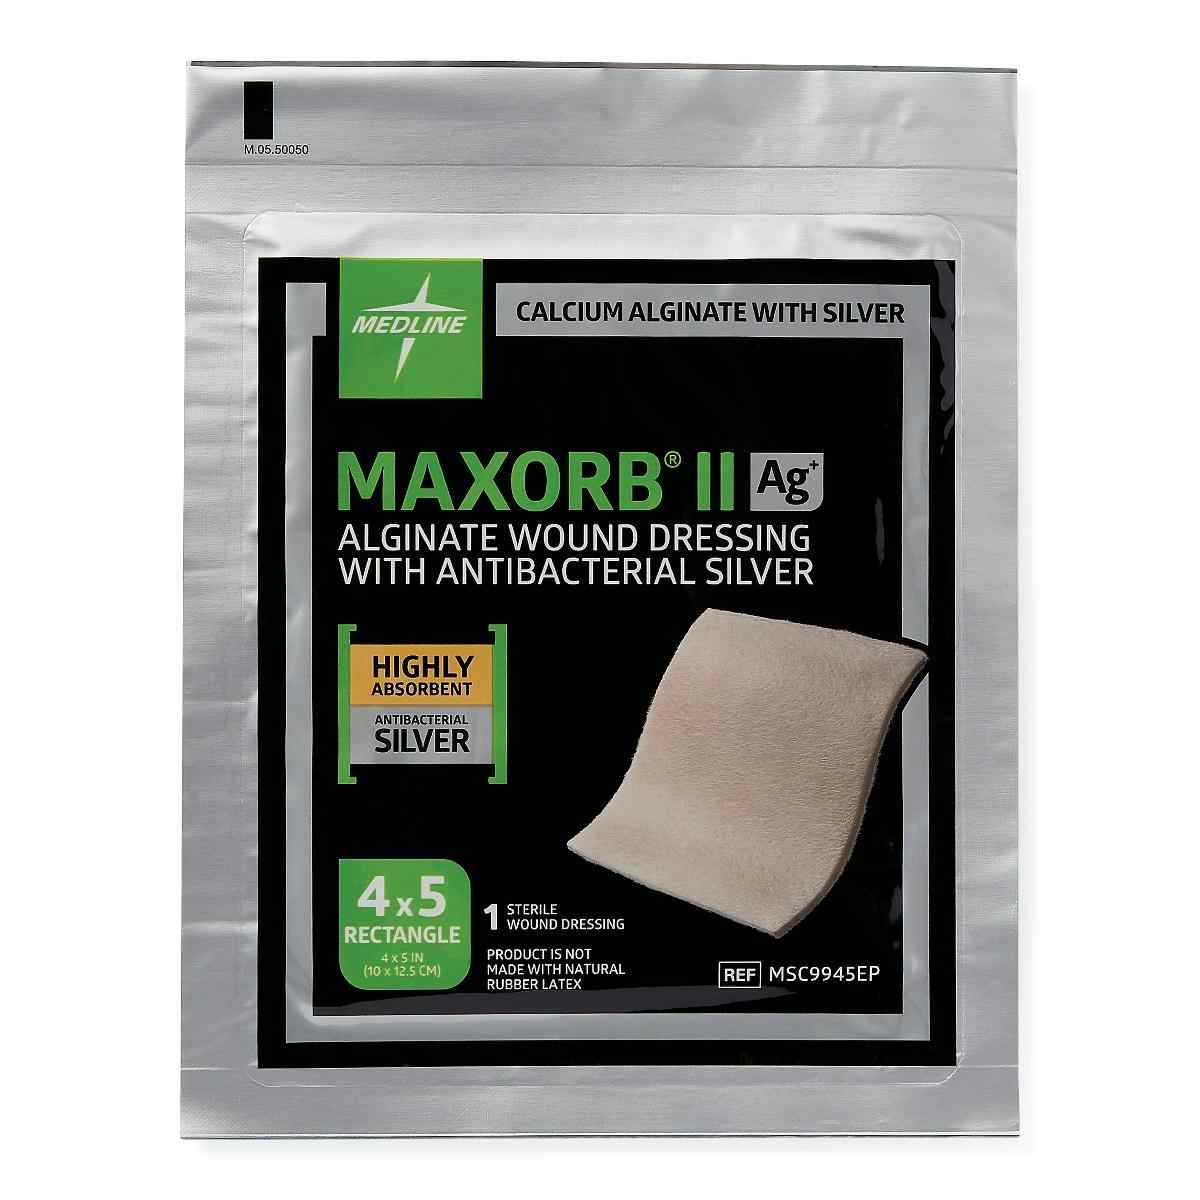 Medline Maxorb II Ag+ Alginate Wound Dressing with Antibacterial Silver, MSC9945EPZ, 4" X 4.75" Square - Box of 10